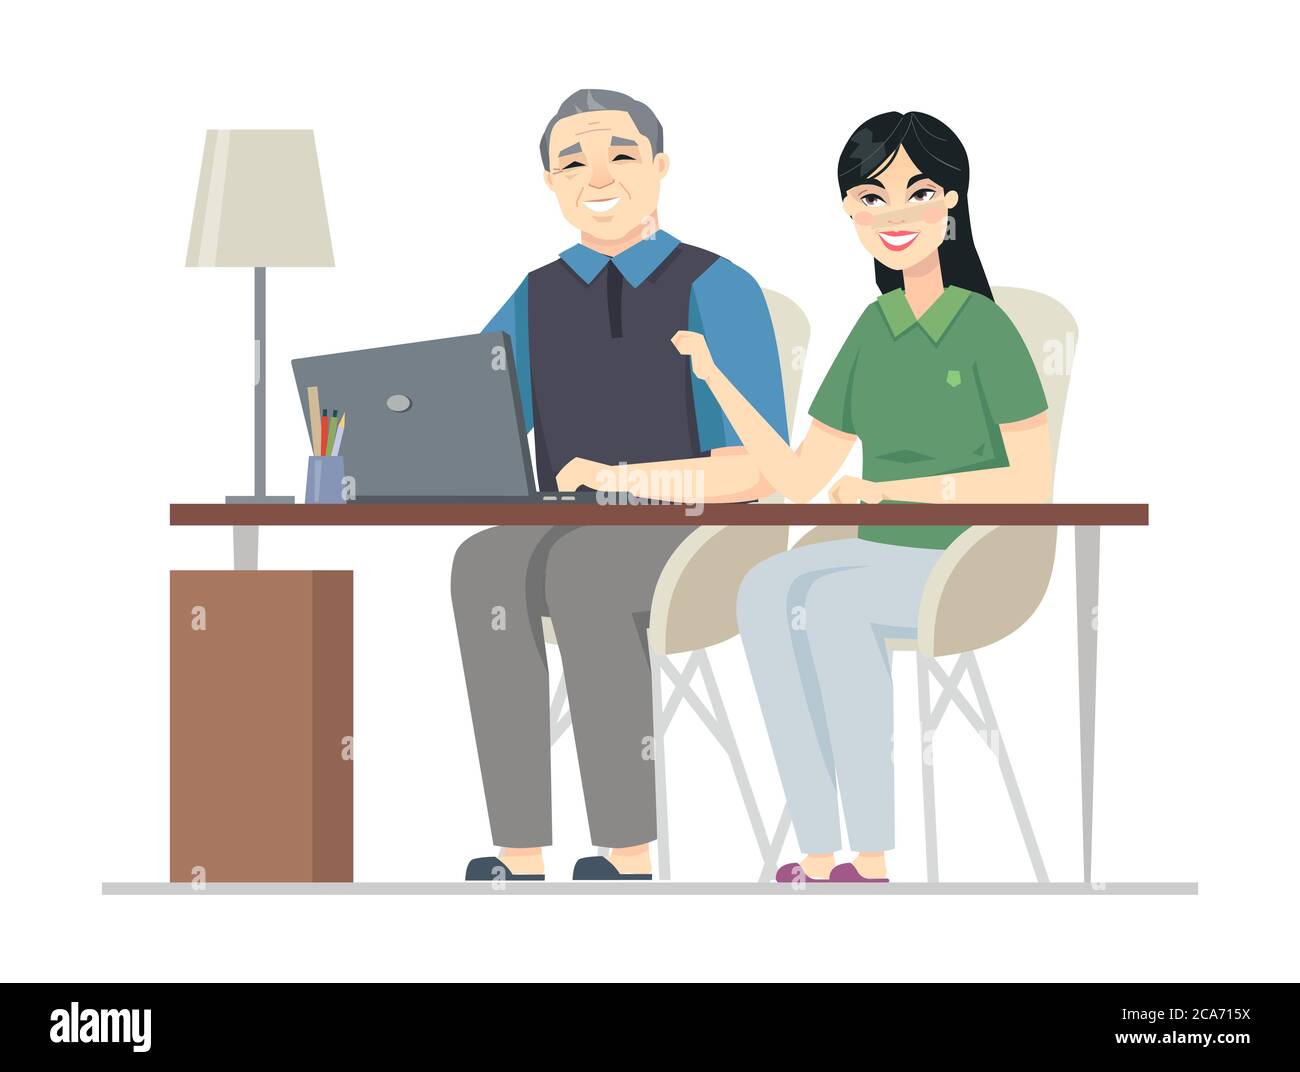 Senior Chinese man at the computer - flat design style illustration Stock Vector